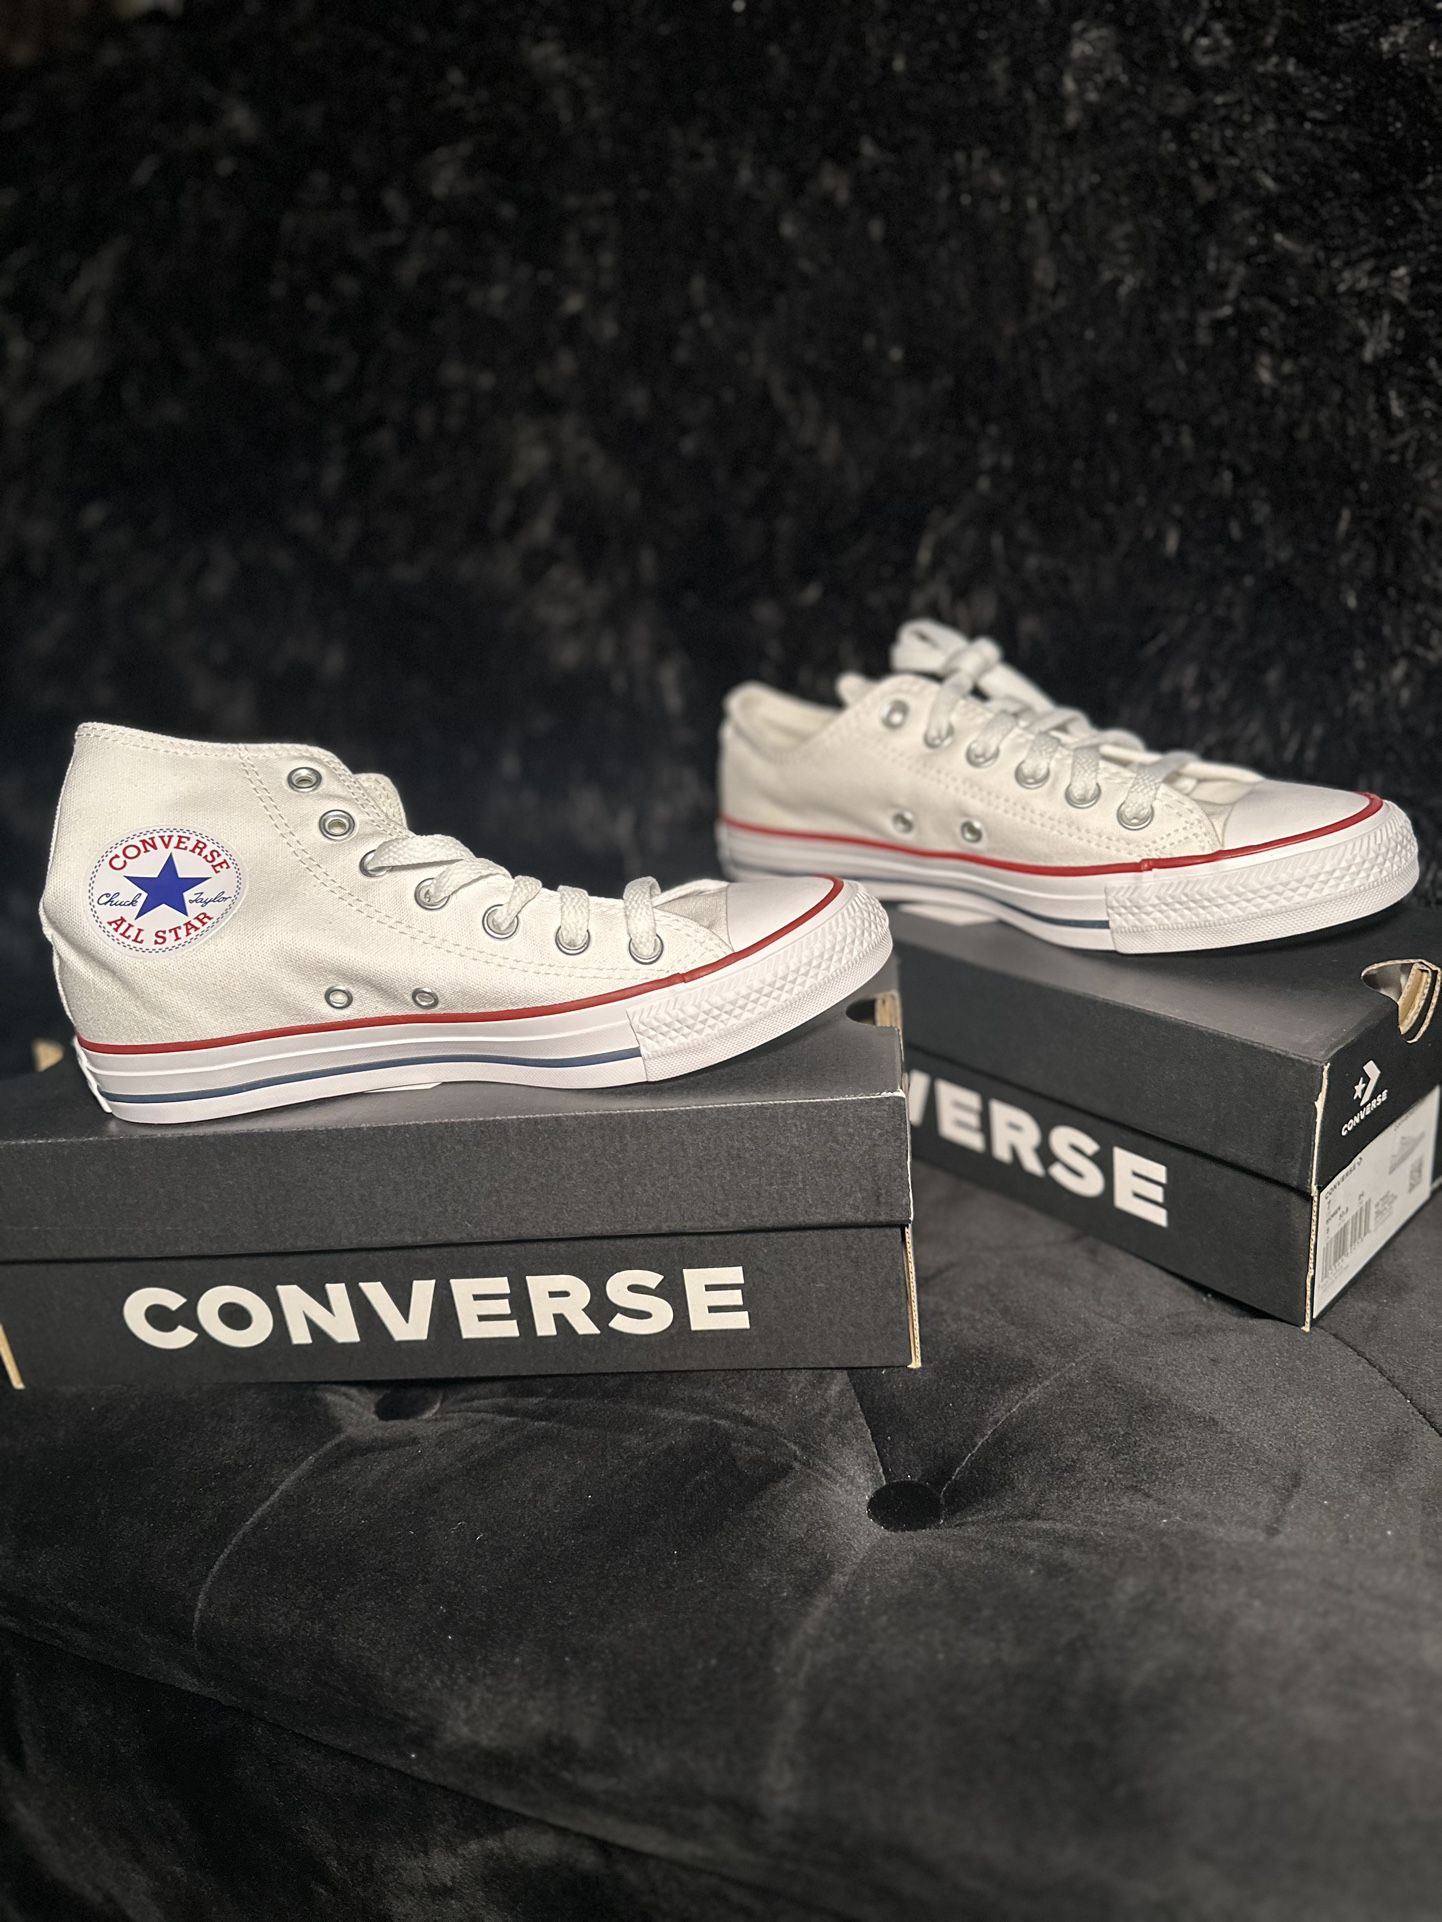 Converses (Women’s Size 7) High Top & Low Top